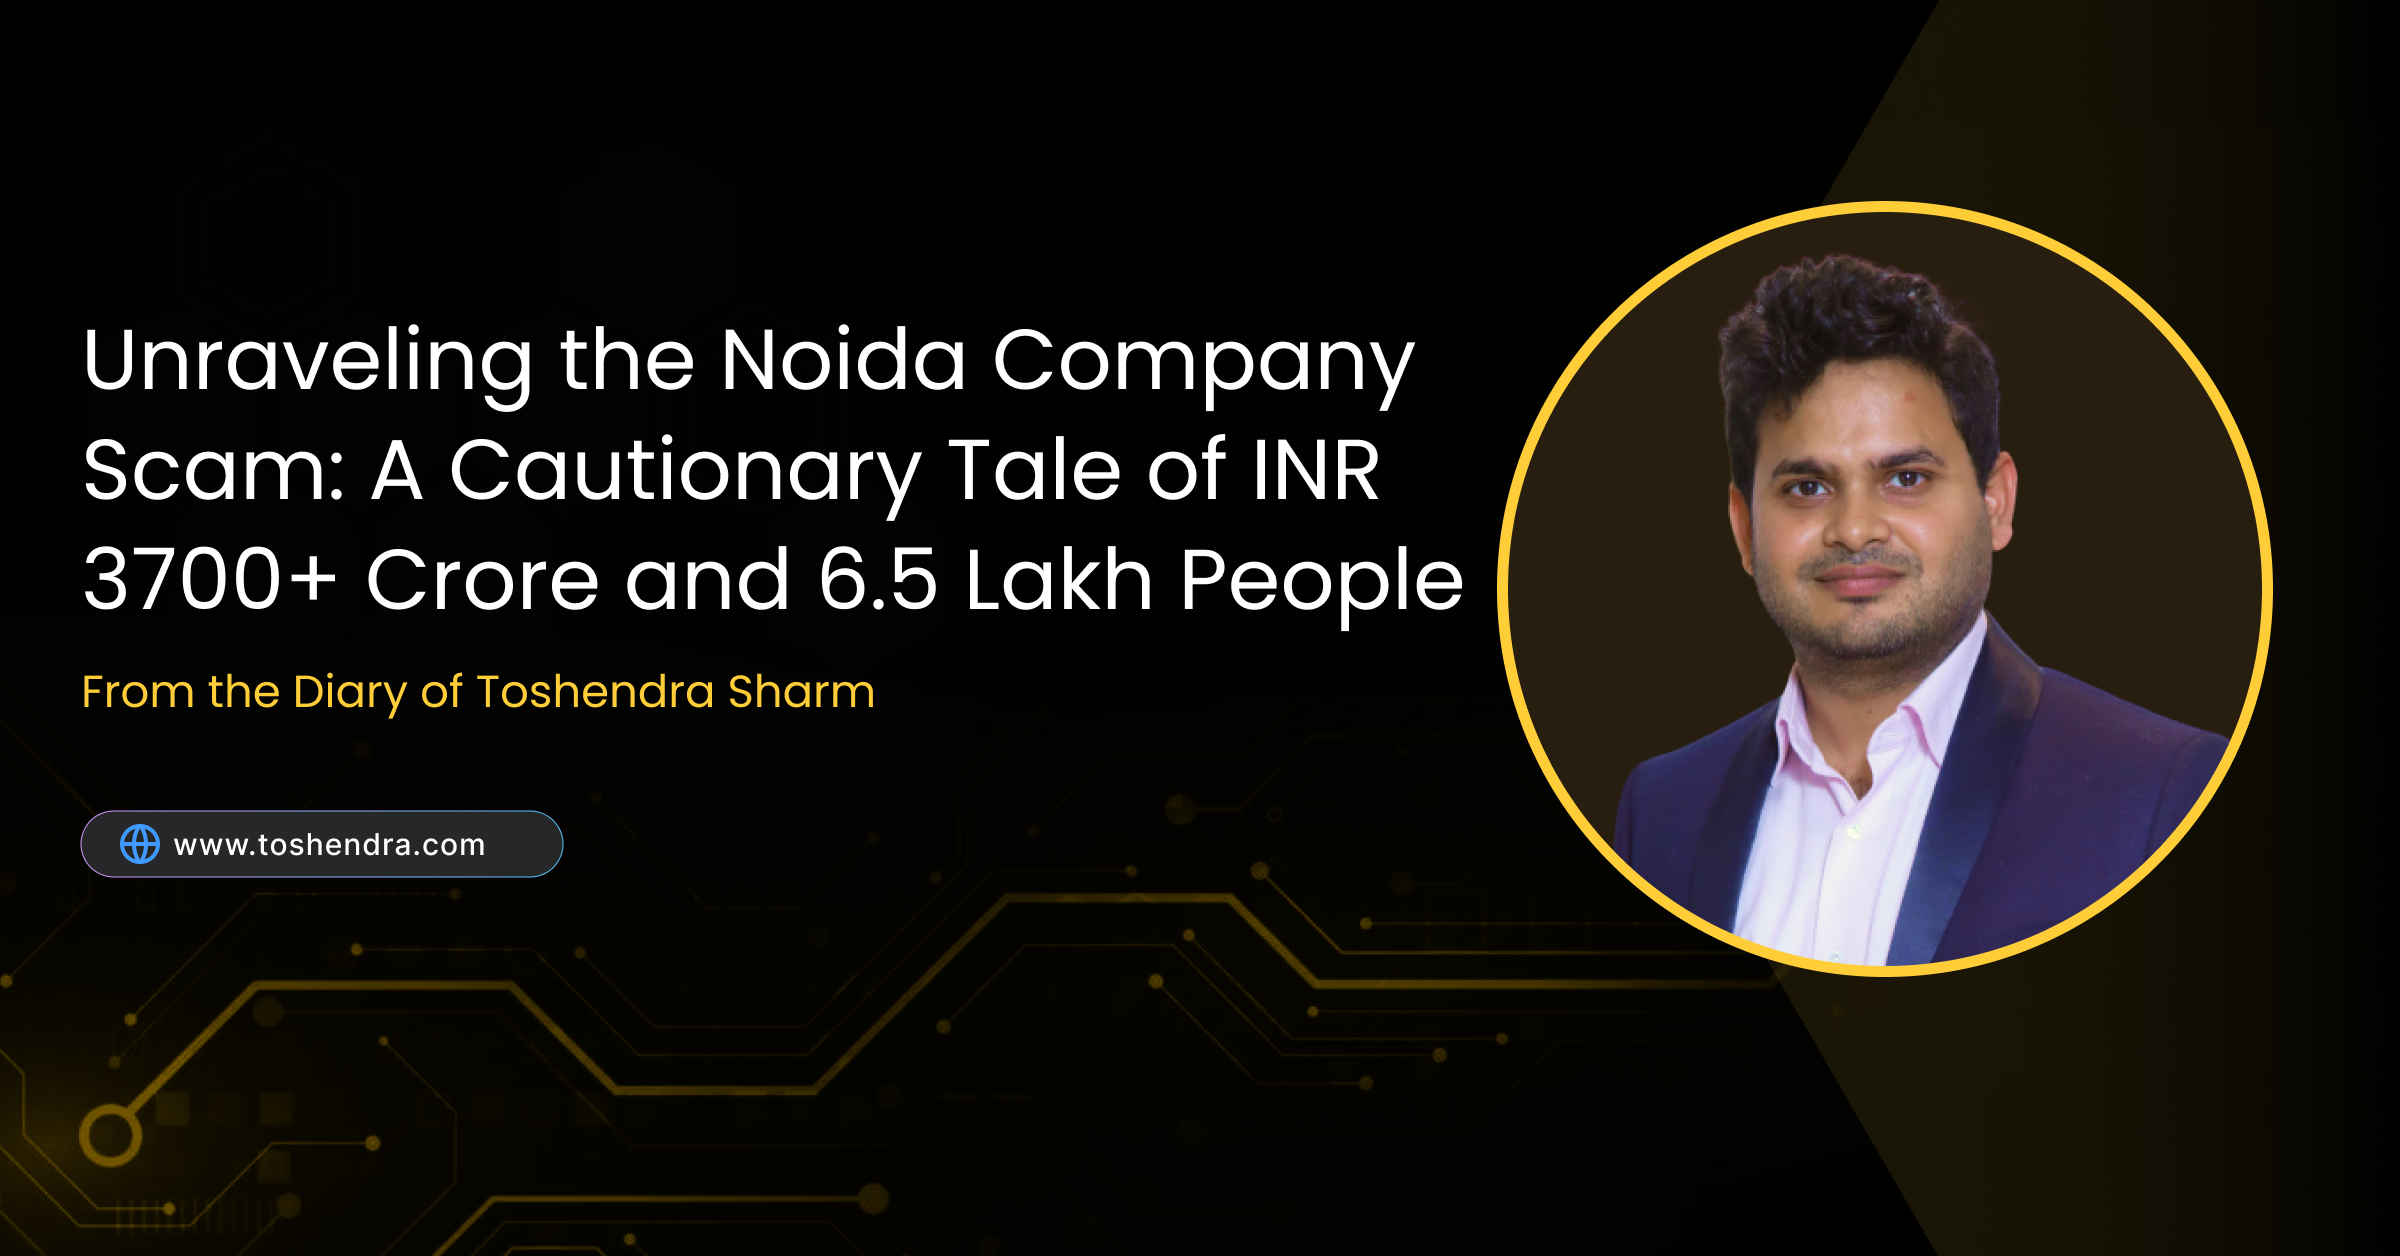 Unraveling the Noida Company Scam: A Cautionary Tale of INR 3700+ Crore and 6.5 Lakh People